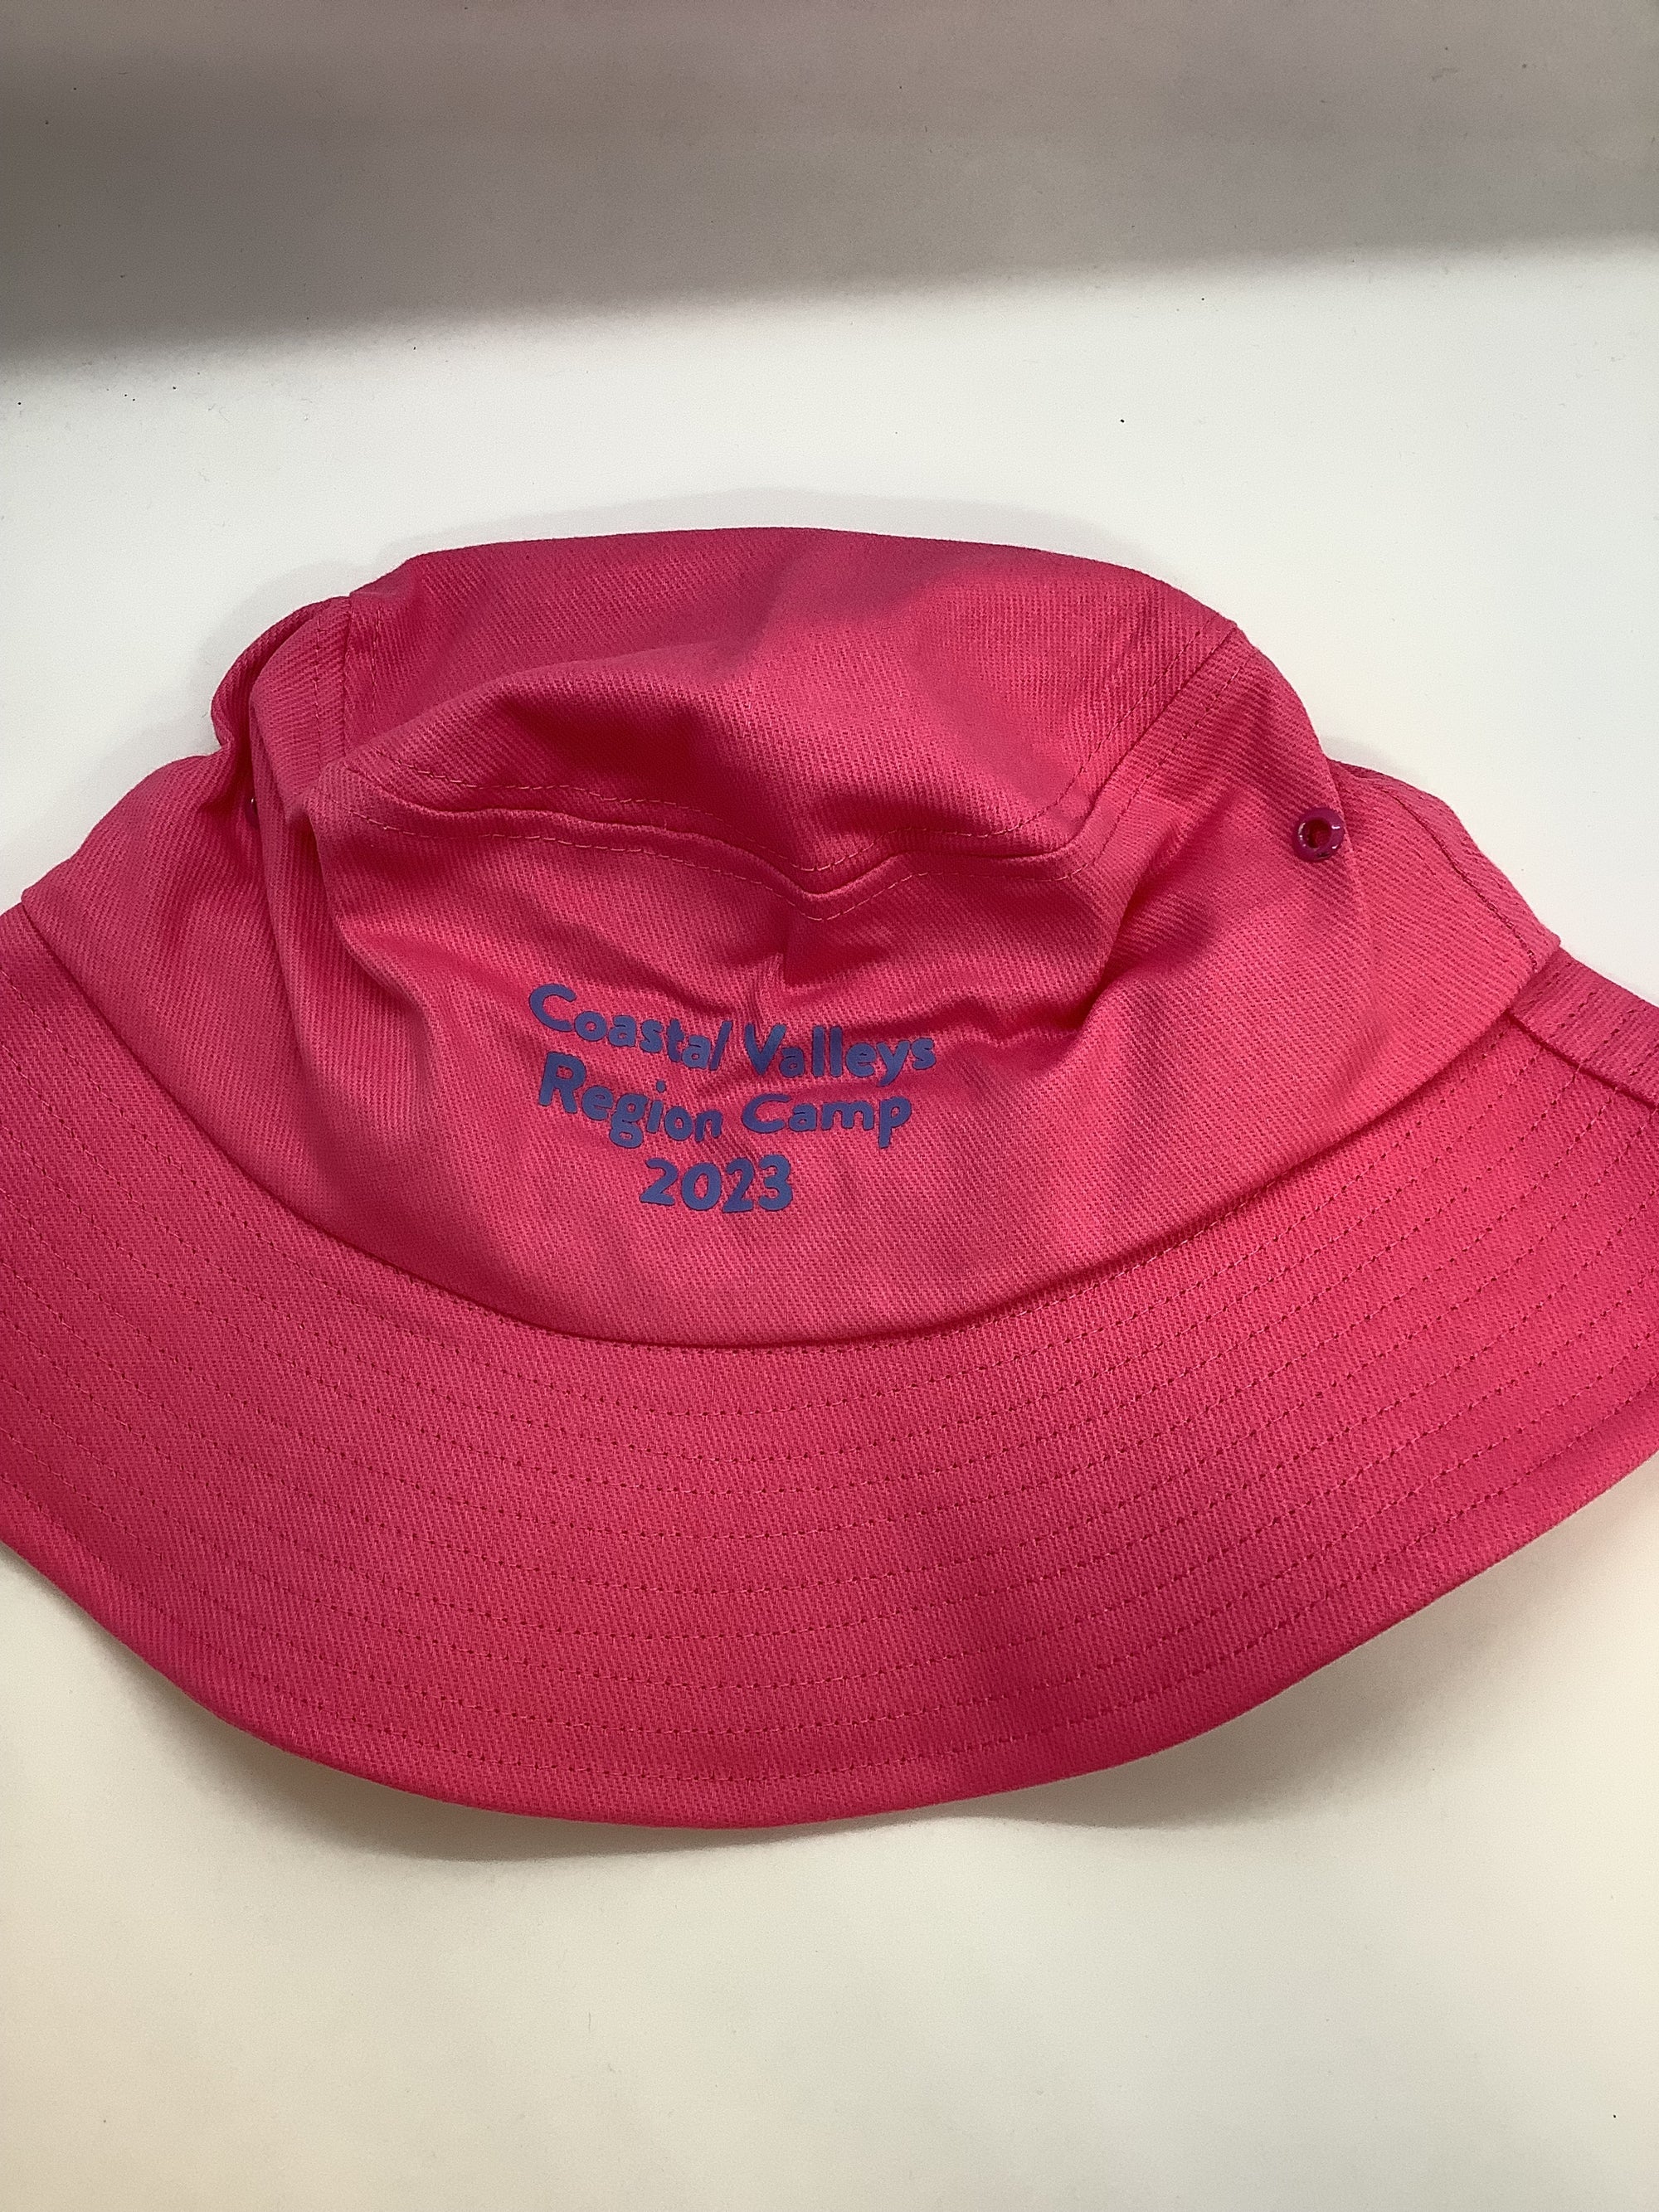 a pink bucket hat with coastal valleys region camp 2023 printed on it